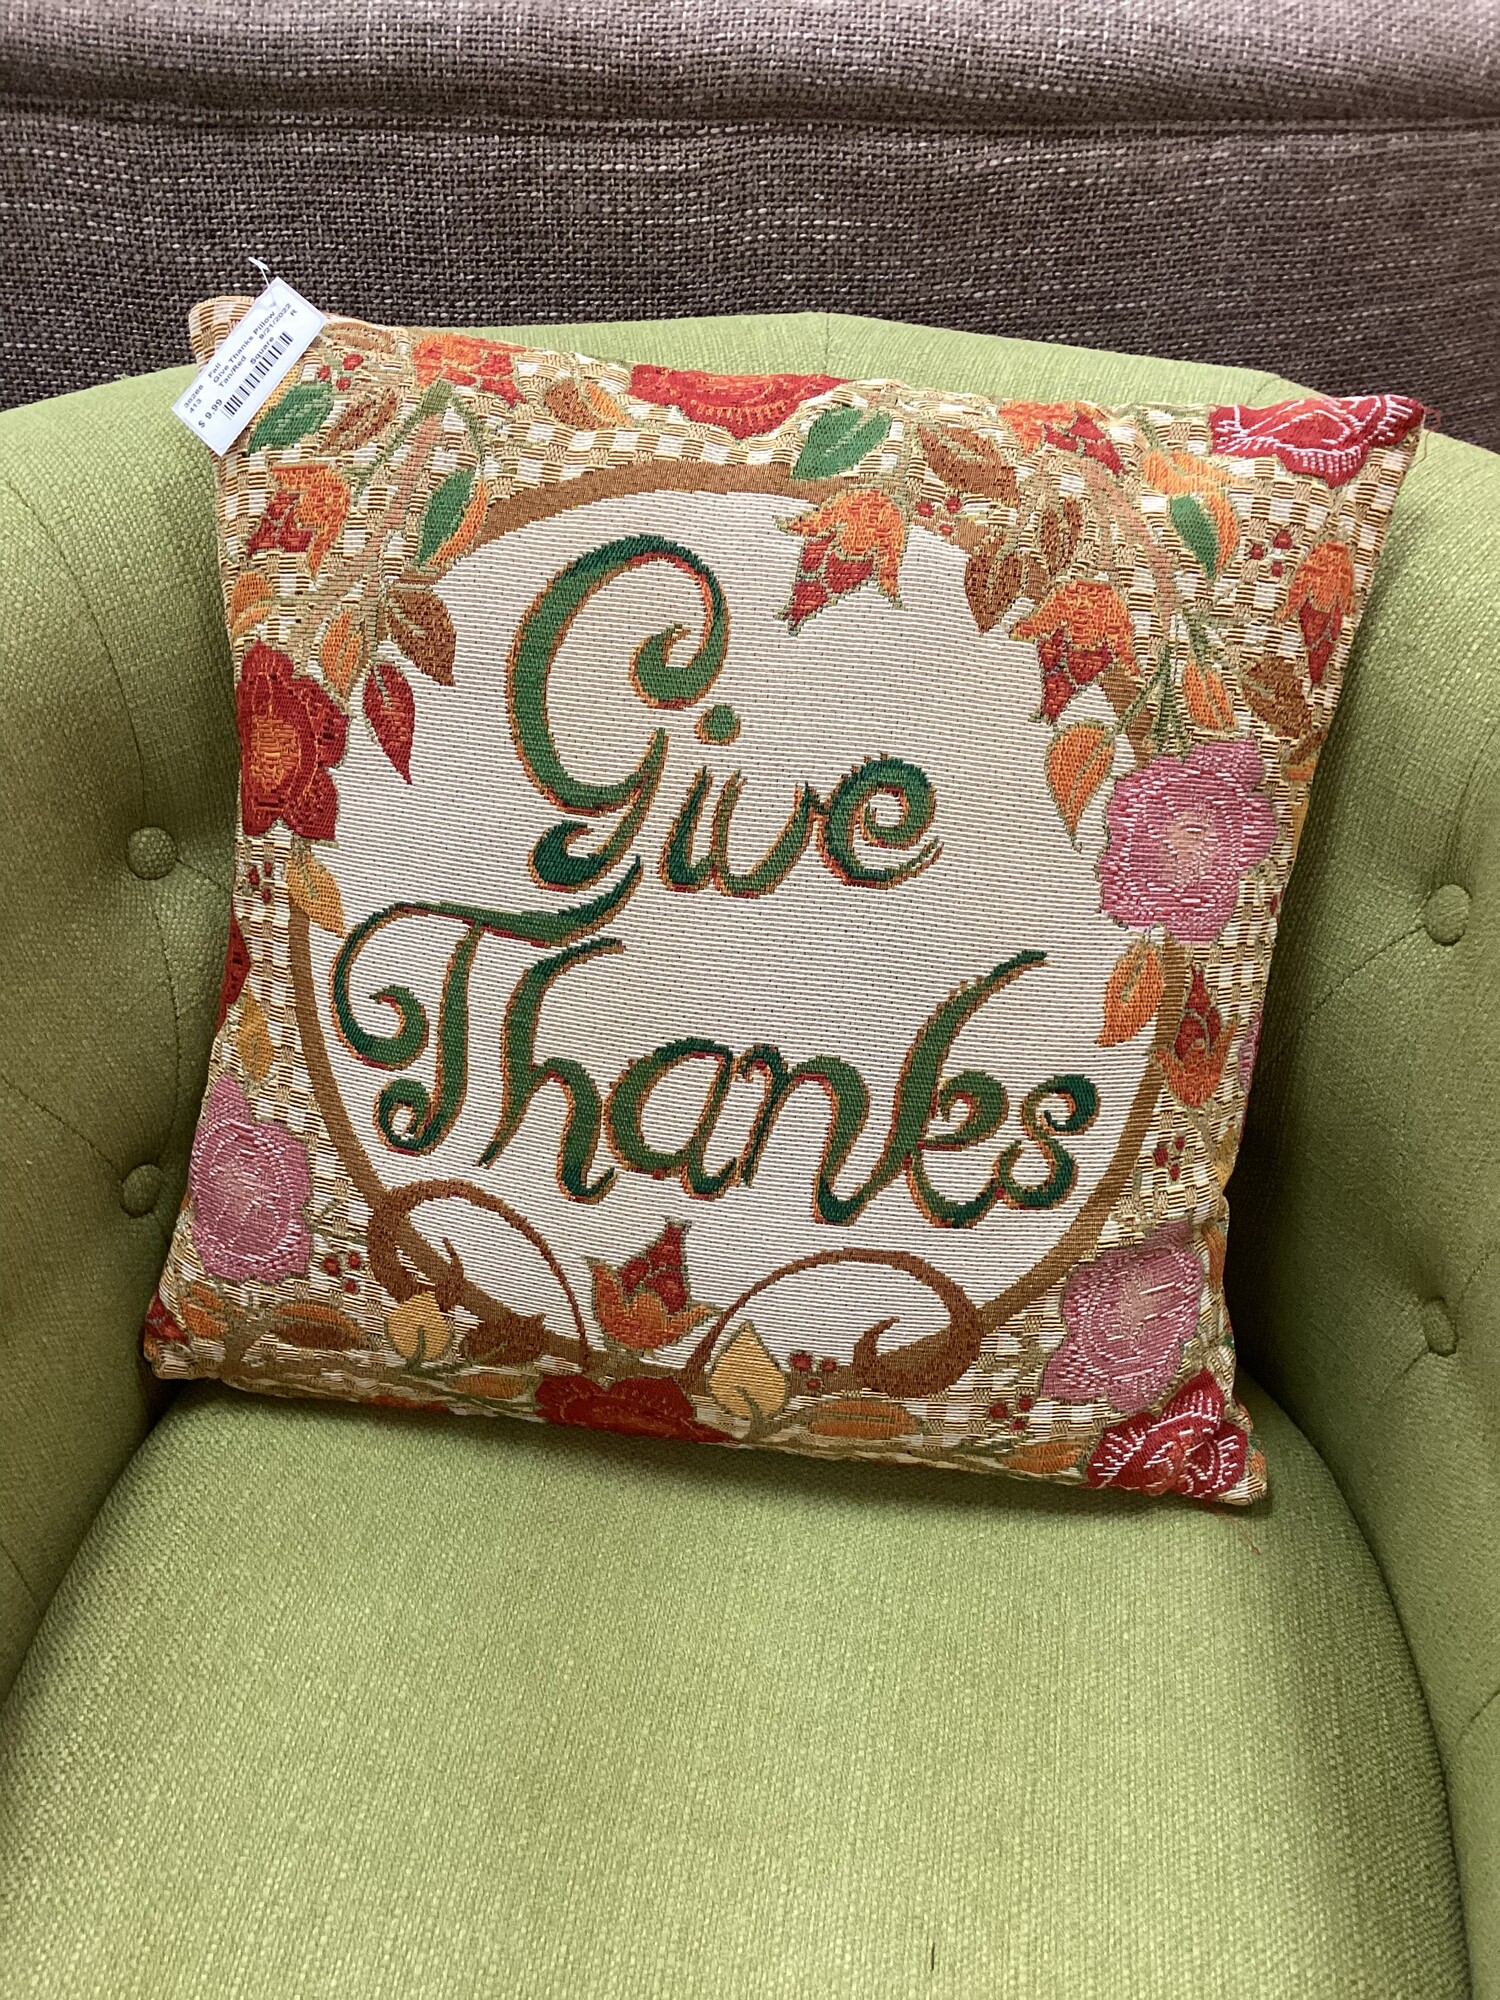 Give Thanks Pillow, Tan/Red, Square
16in x 16in